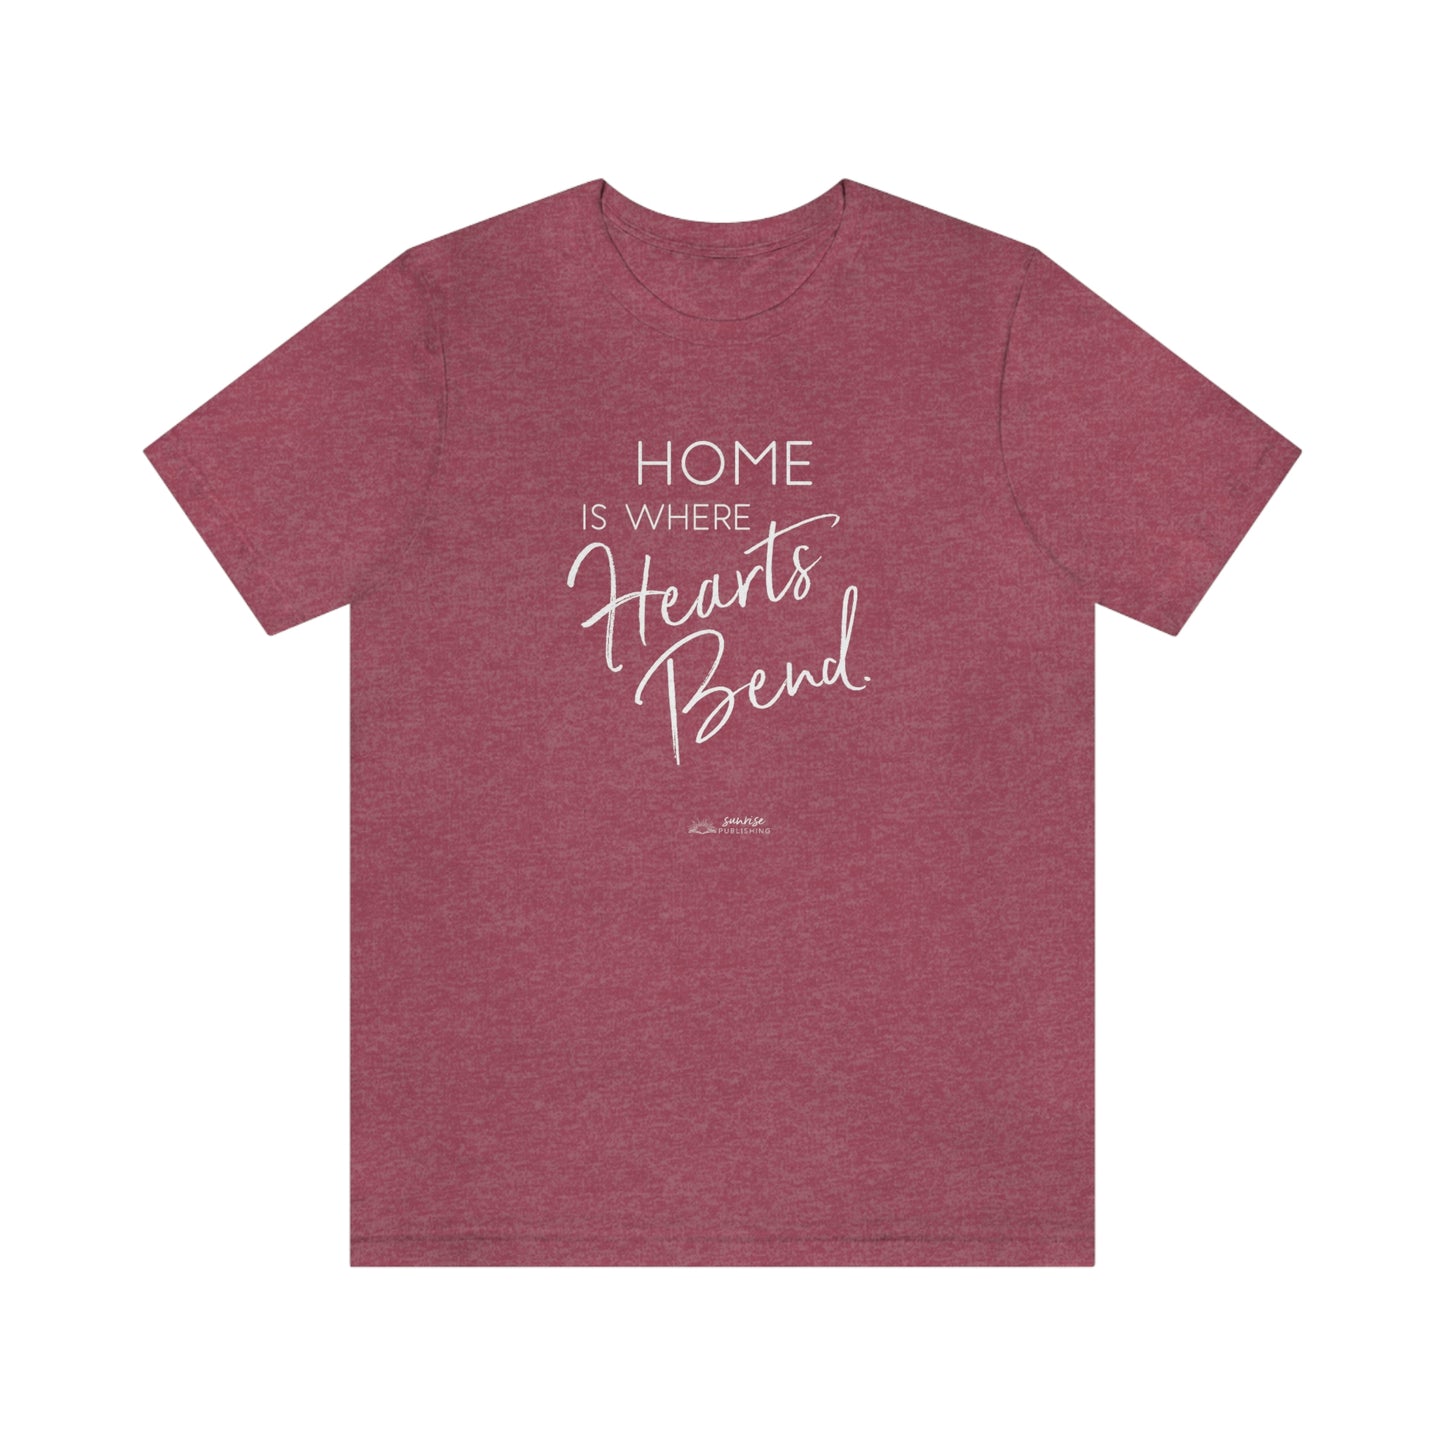 "Home is where Hearts Bend." - Short Sleeve Tee